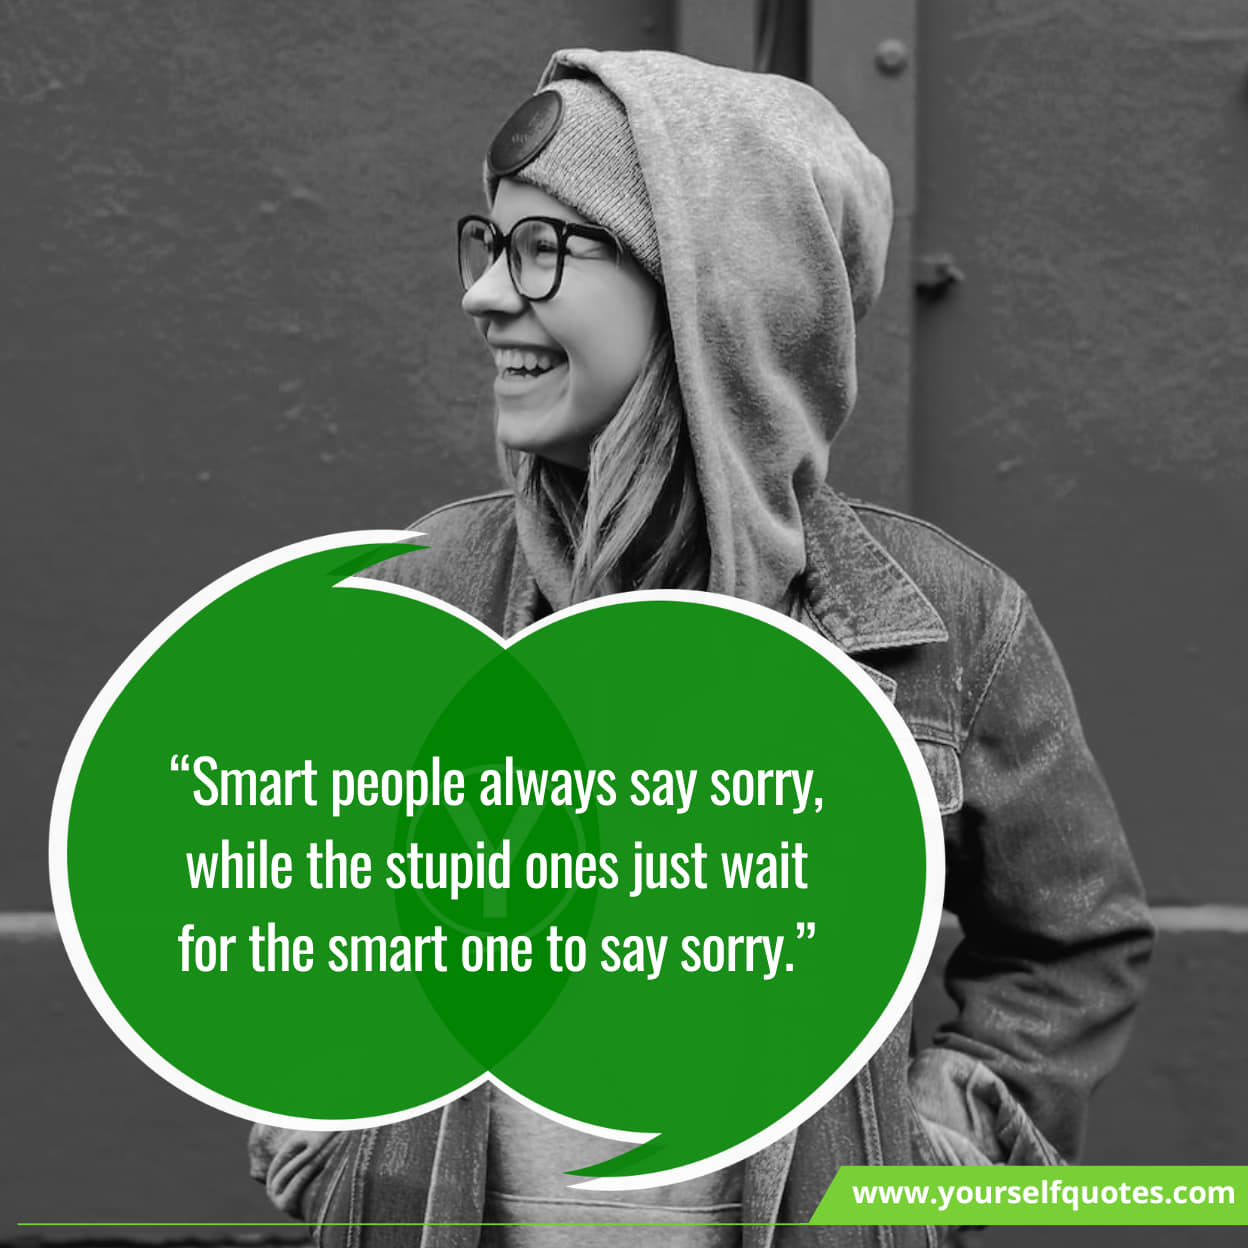 77 Sorry Quotes And Messages To Express Your Apologies